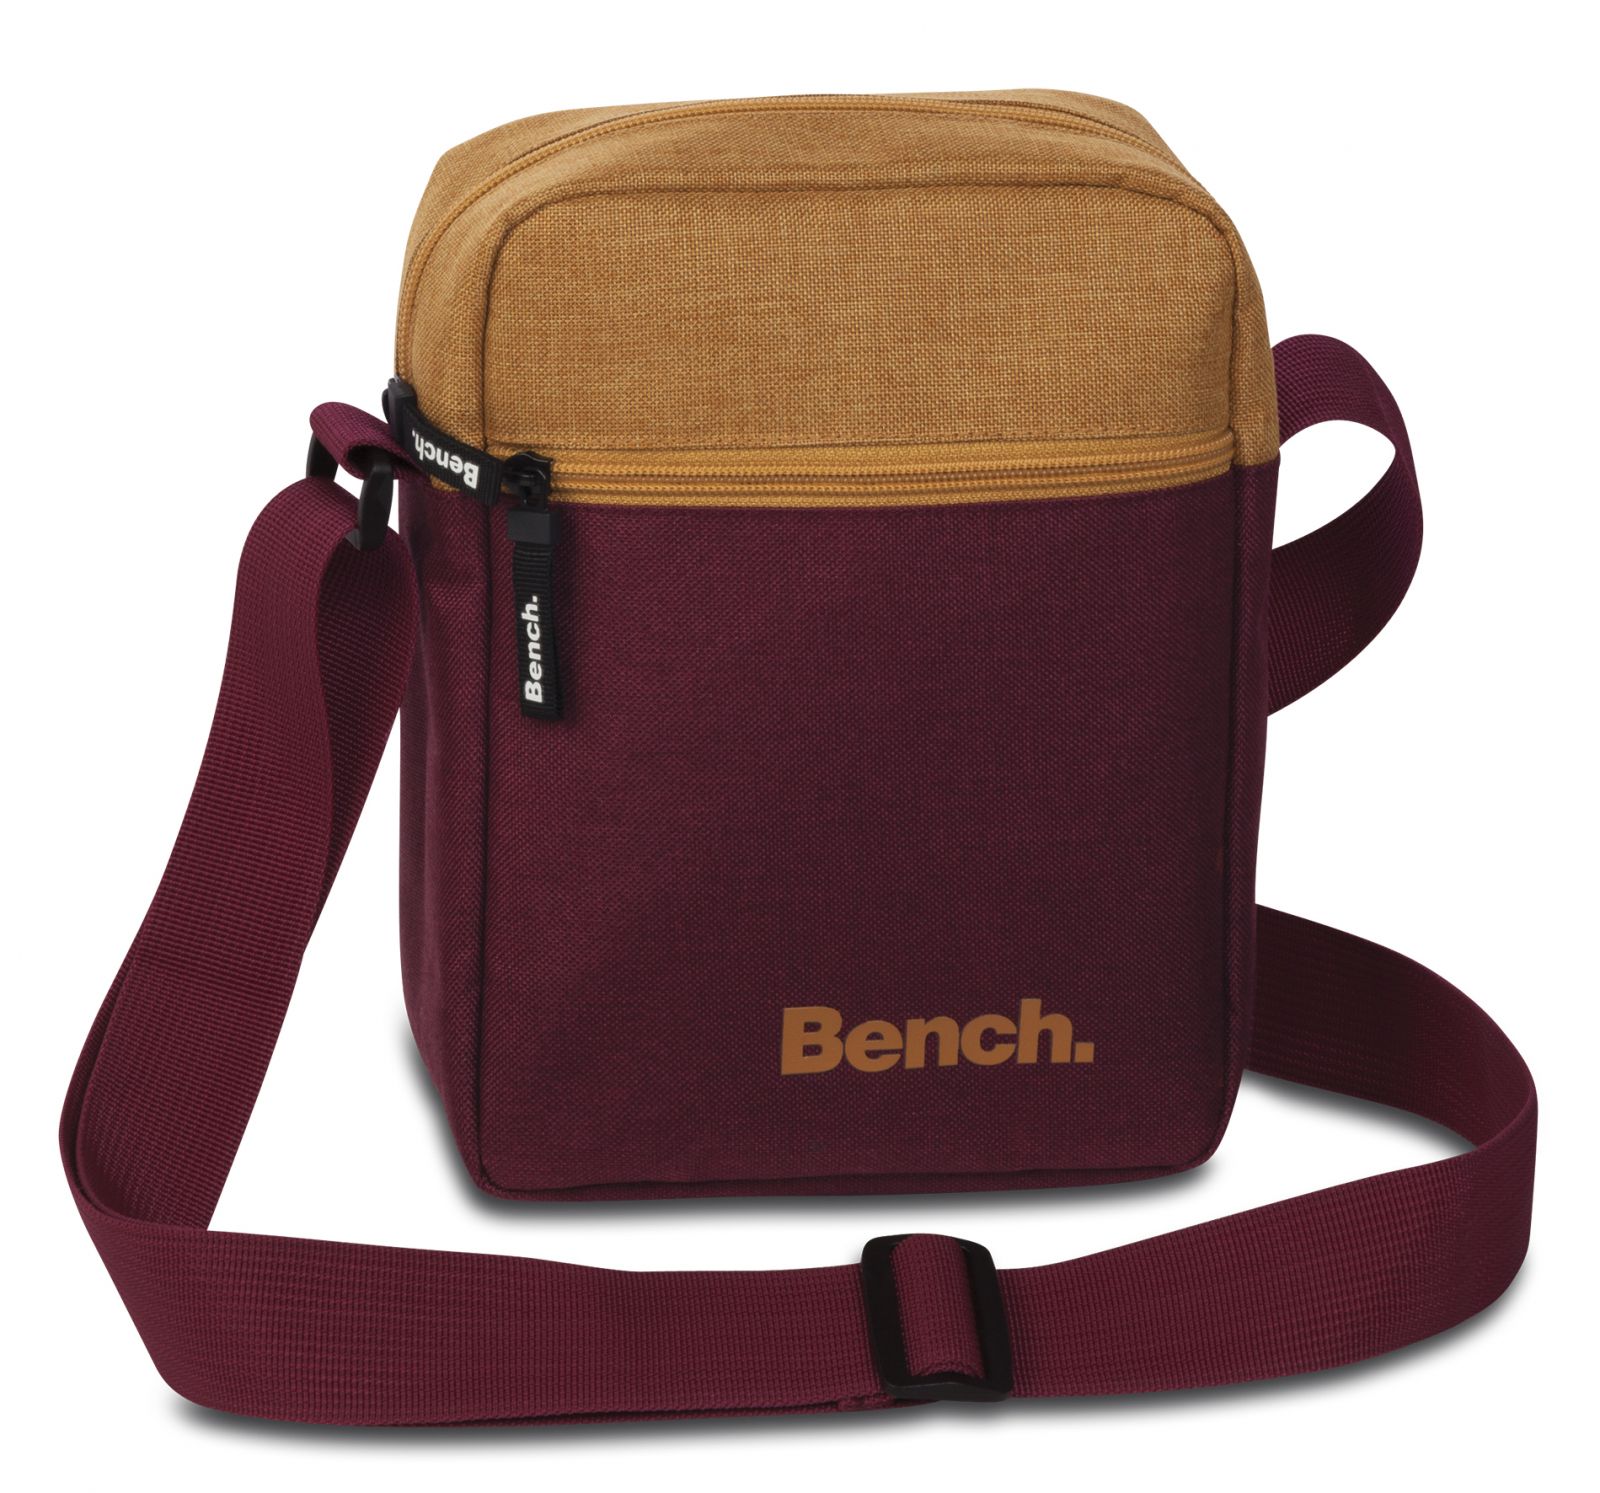 Fabrizio Bench - messenger CLASSiC osker/brombeer 64153-3651